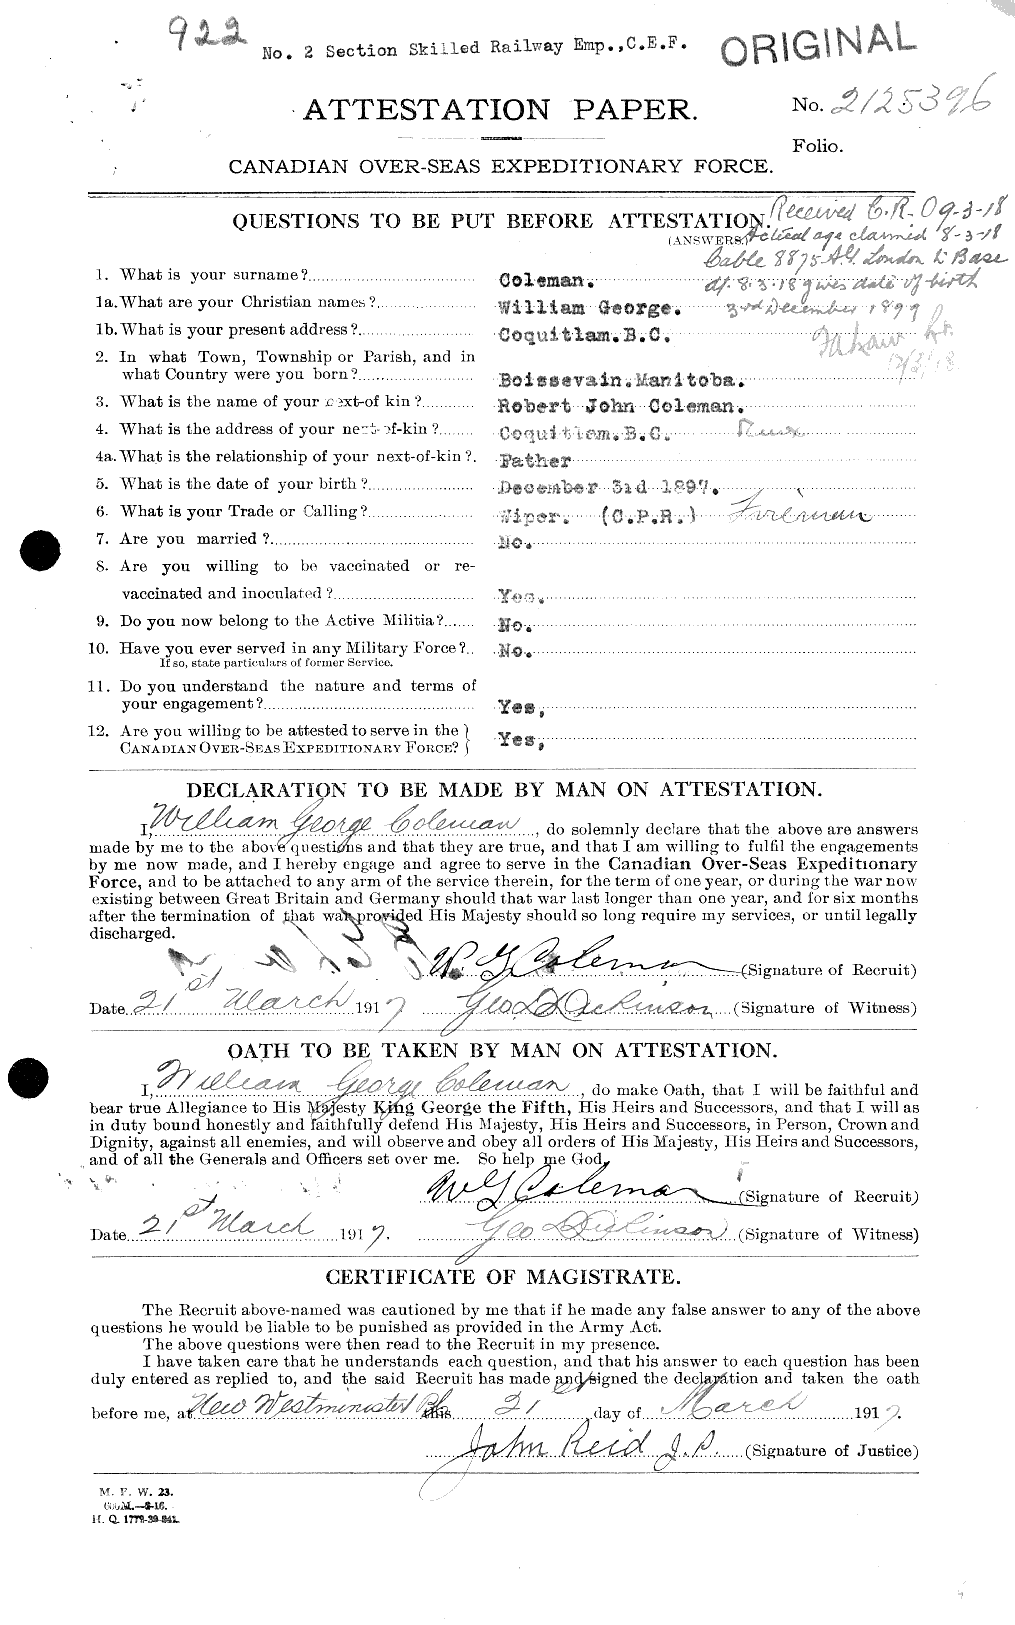 Personnel Records of the First World War - CEF 028312a